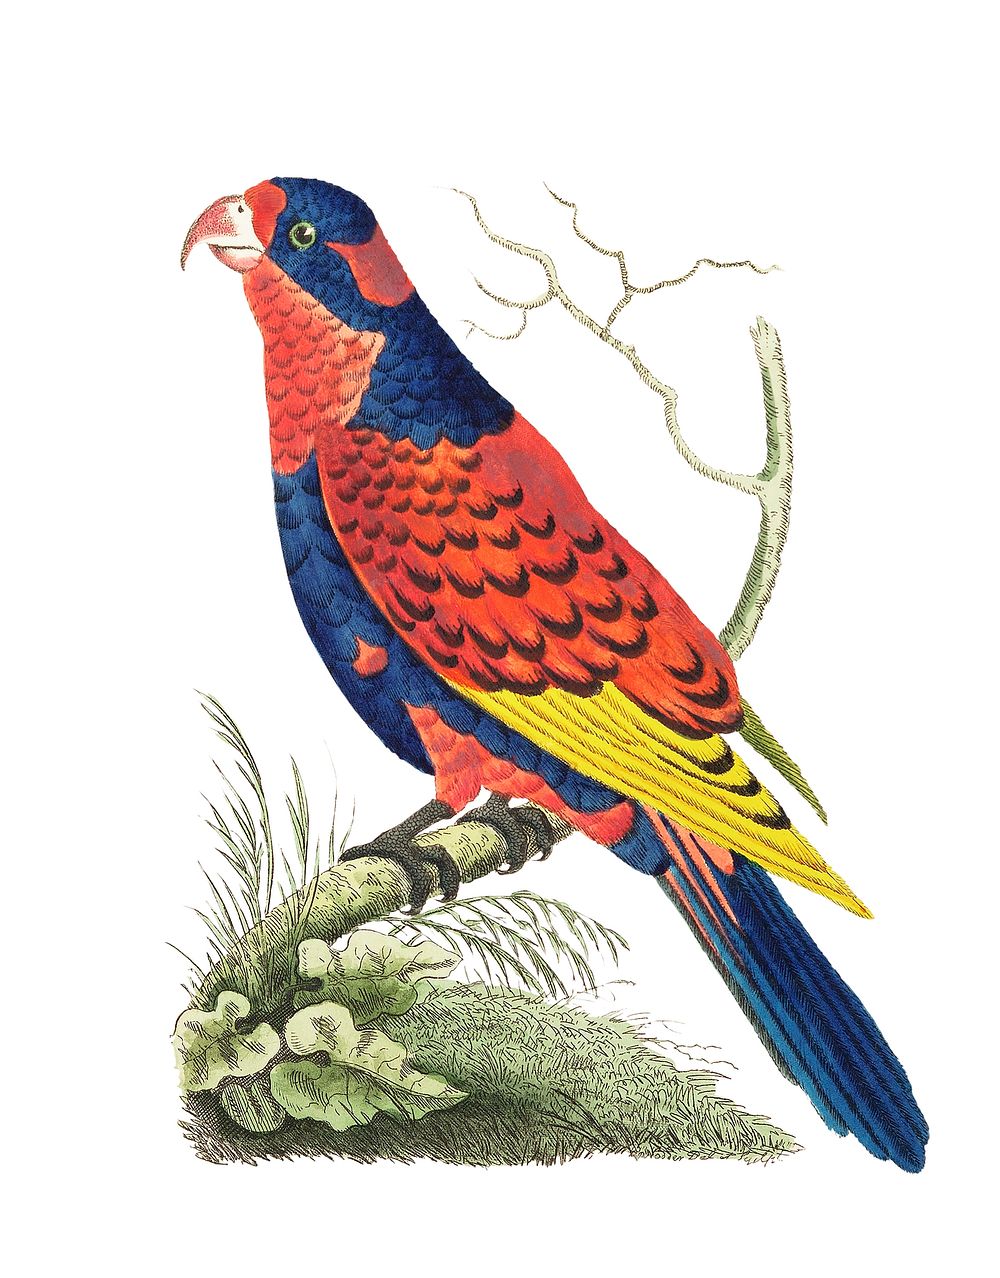 Indian lory illustration from The Naturalist's Miscellany (1789-1813) by George Shaw (1751-1813)